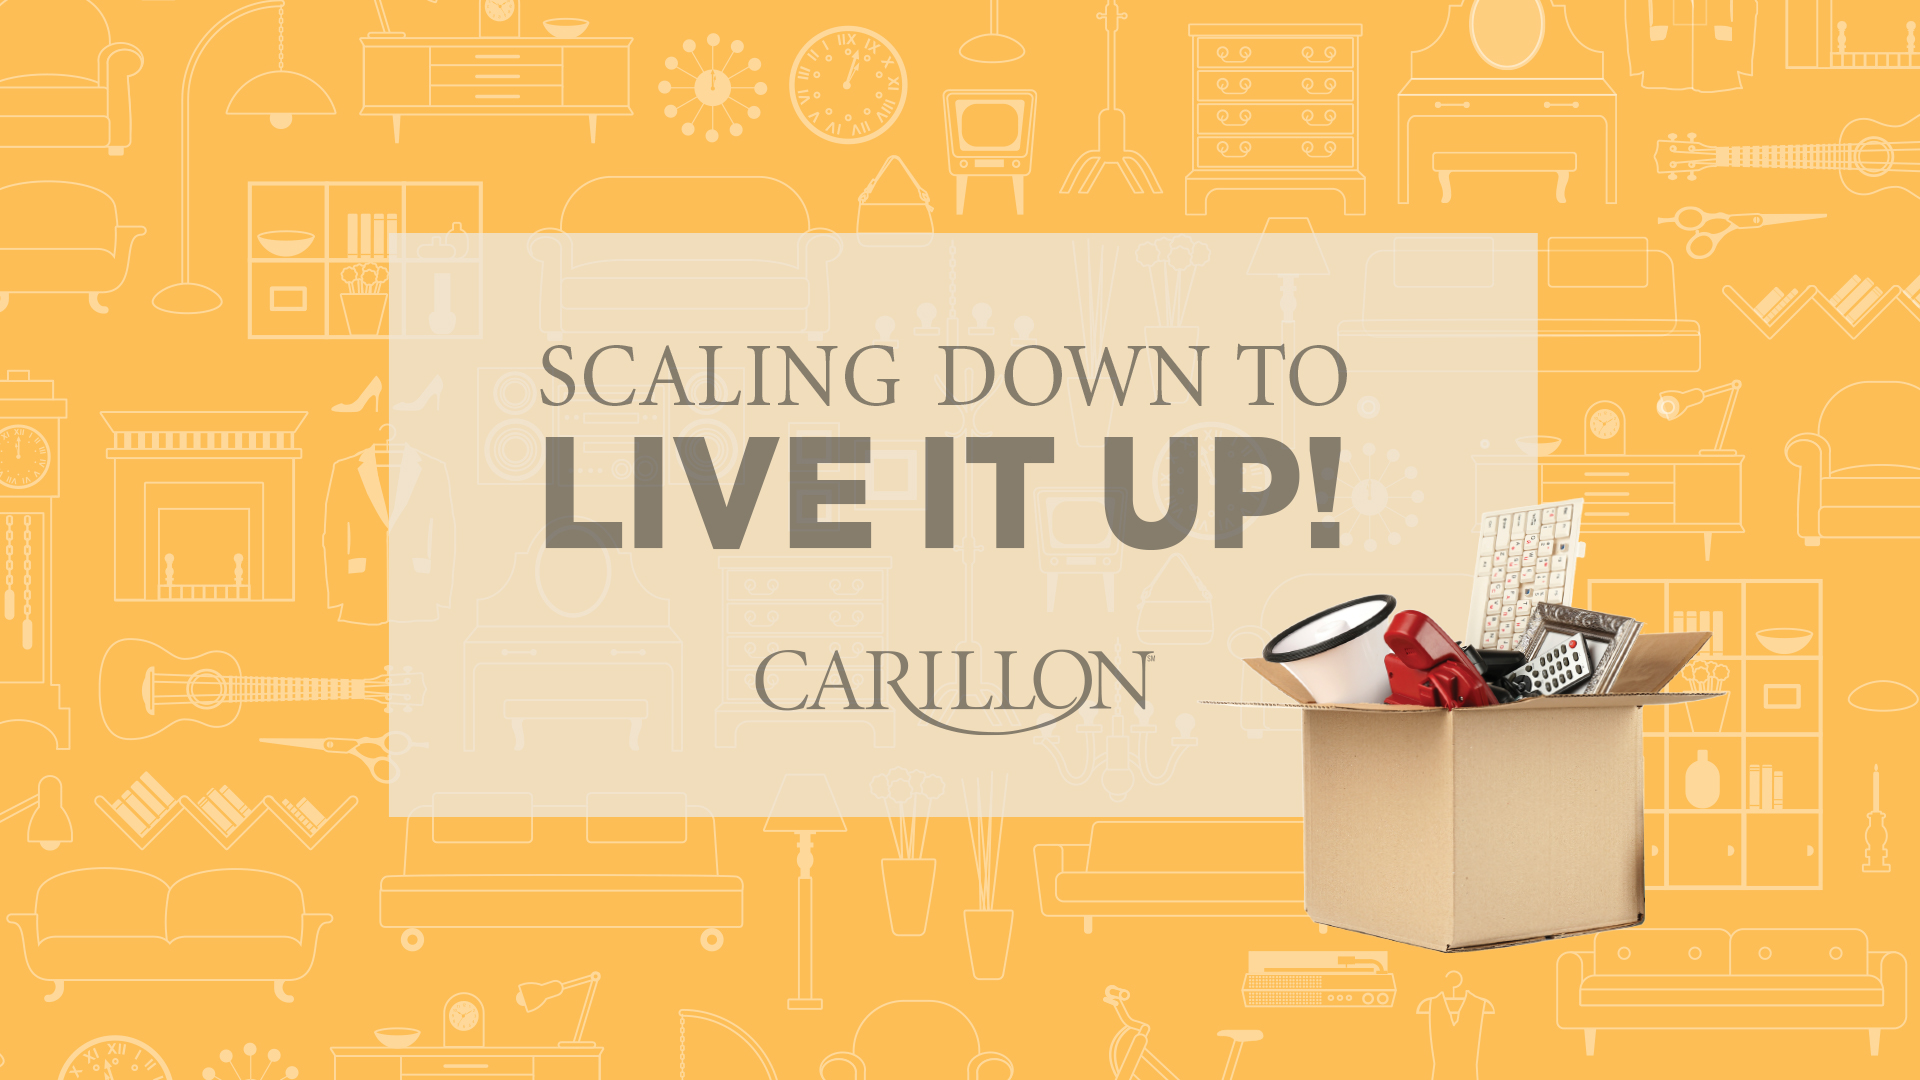 Carillon's Scaling Down Event